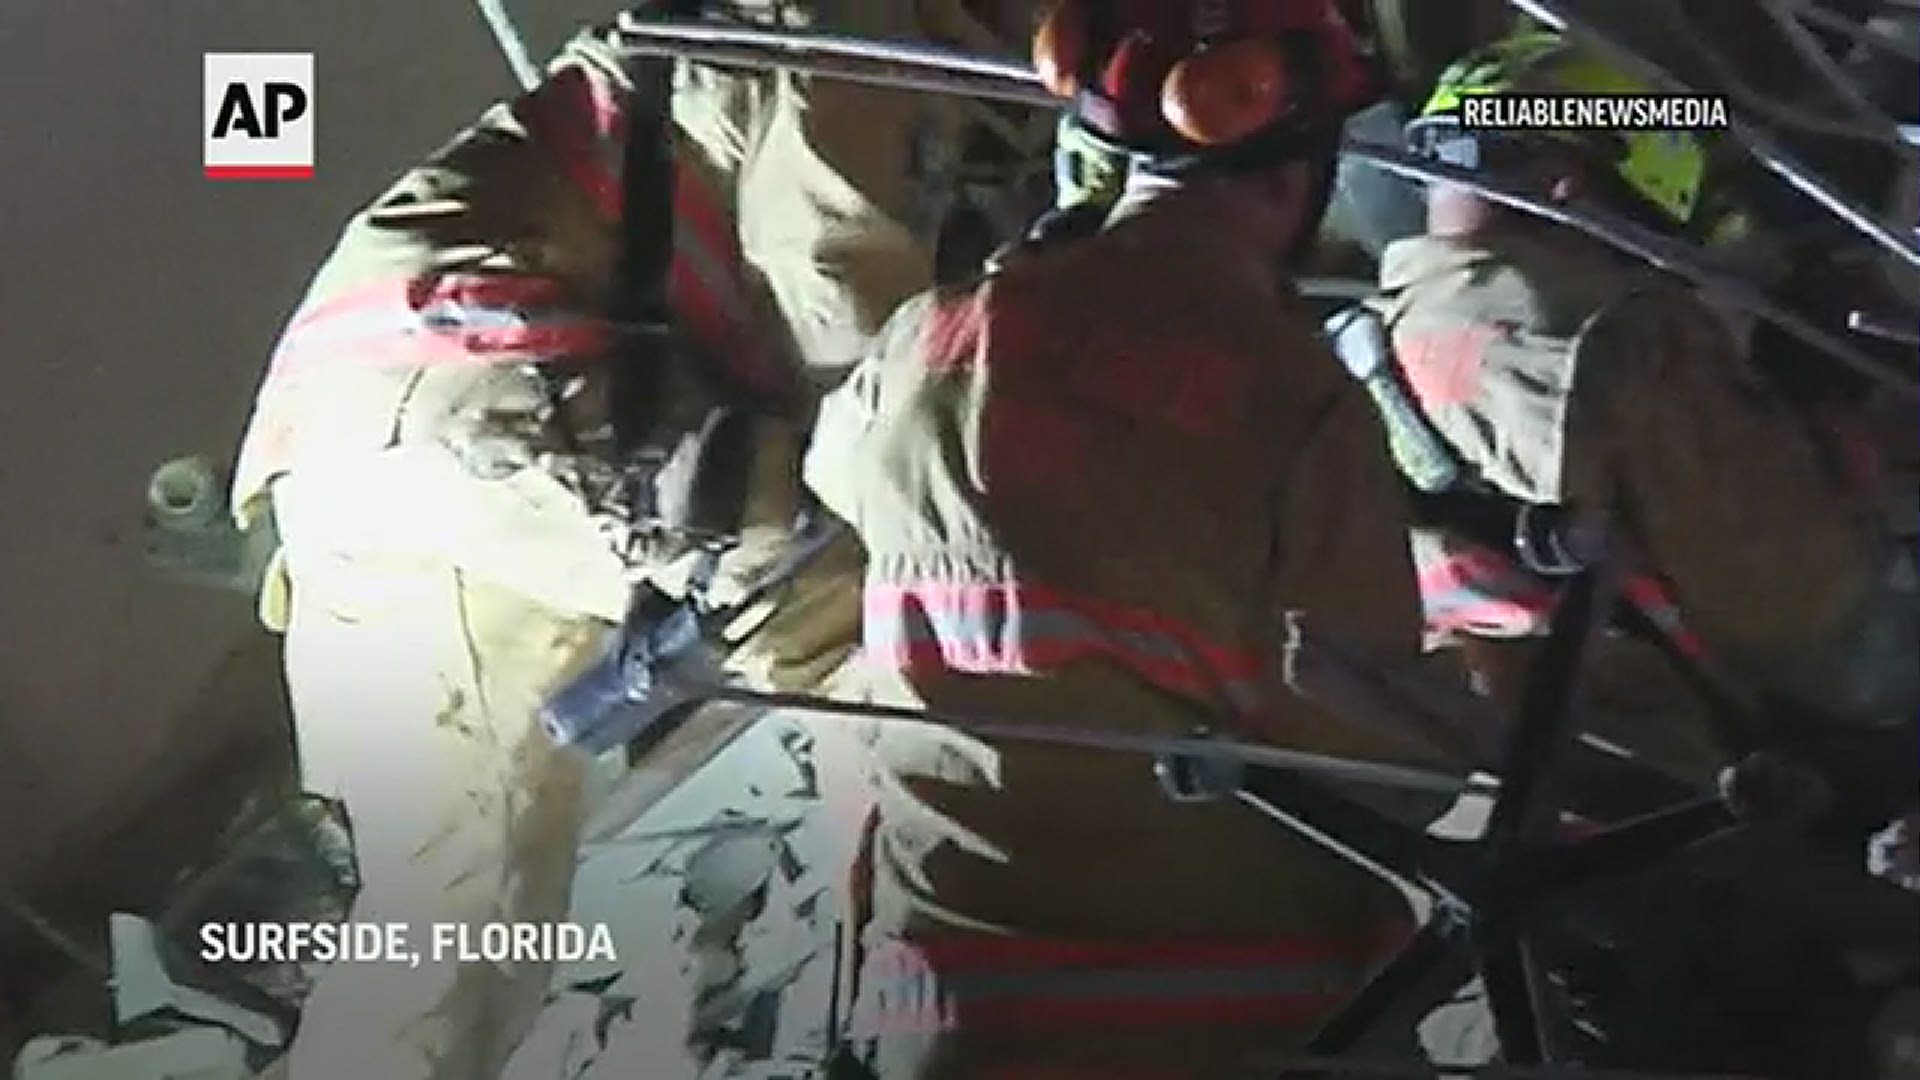 Video showed fire crews removing a boy from the wreckage of a Miami-area condo collapse on June 24, 2021.